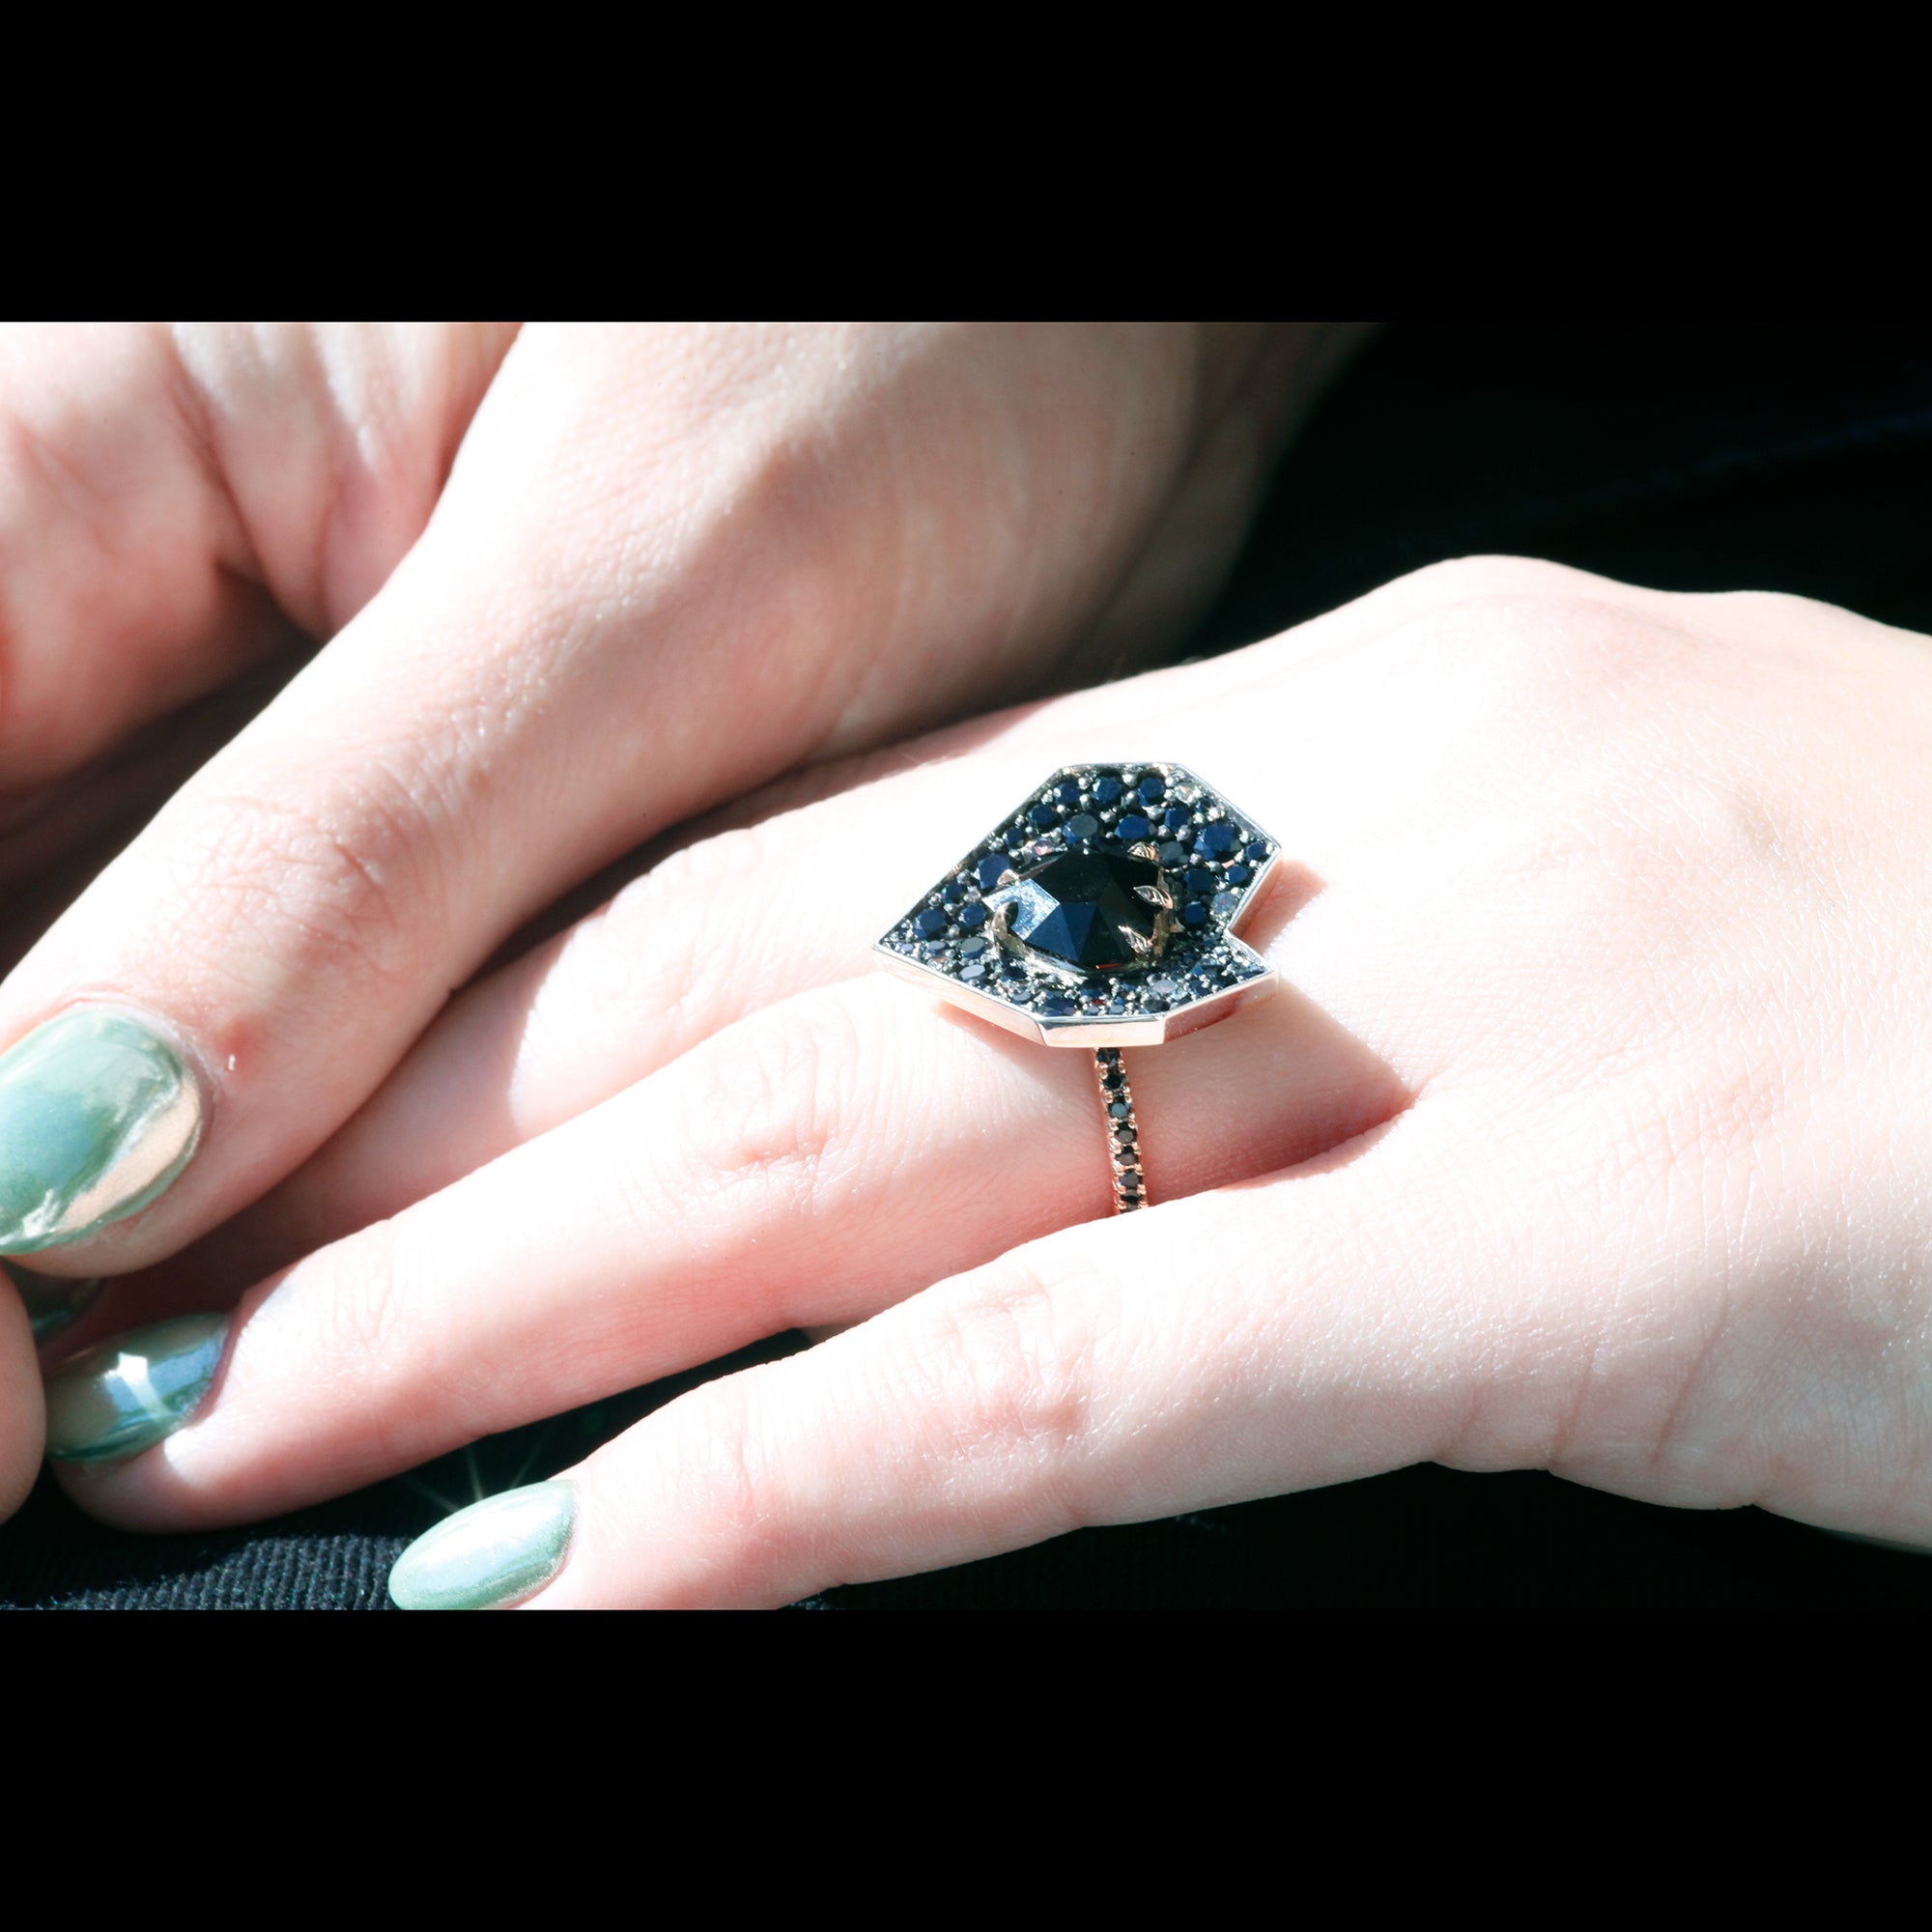 Heart-shaped statement ring on hand with pave set sapphires and spinel center stone